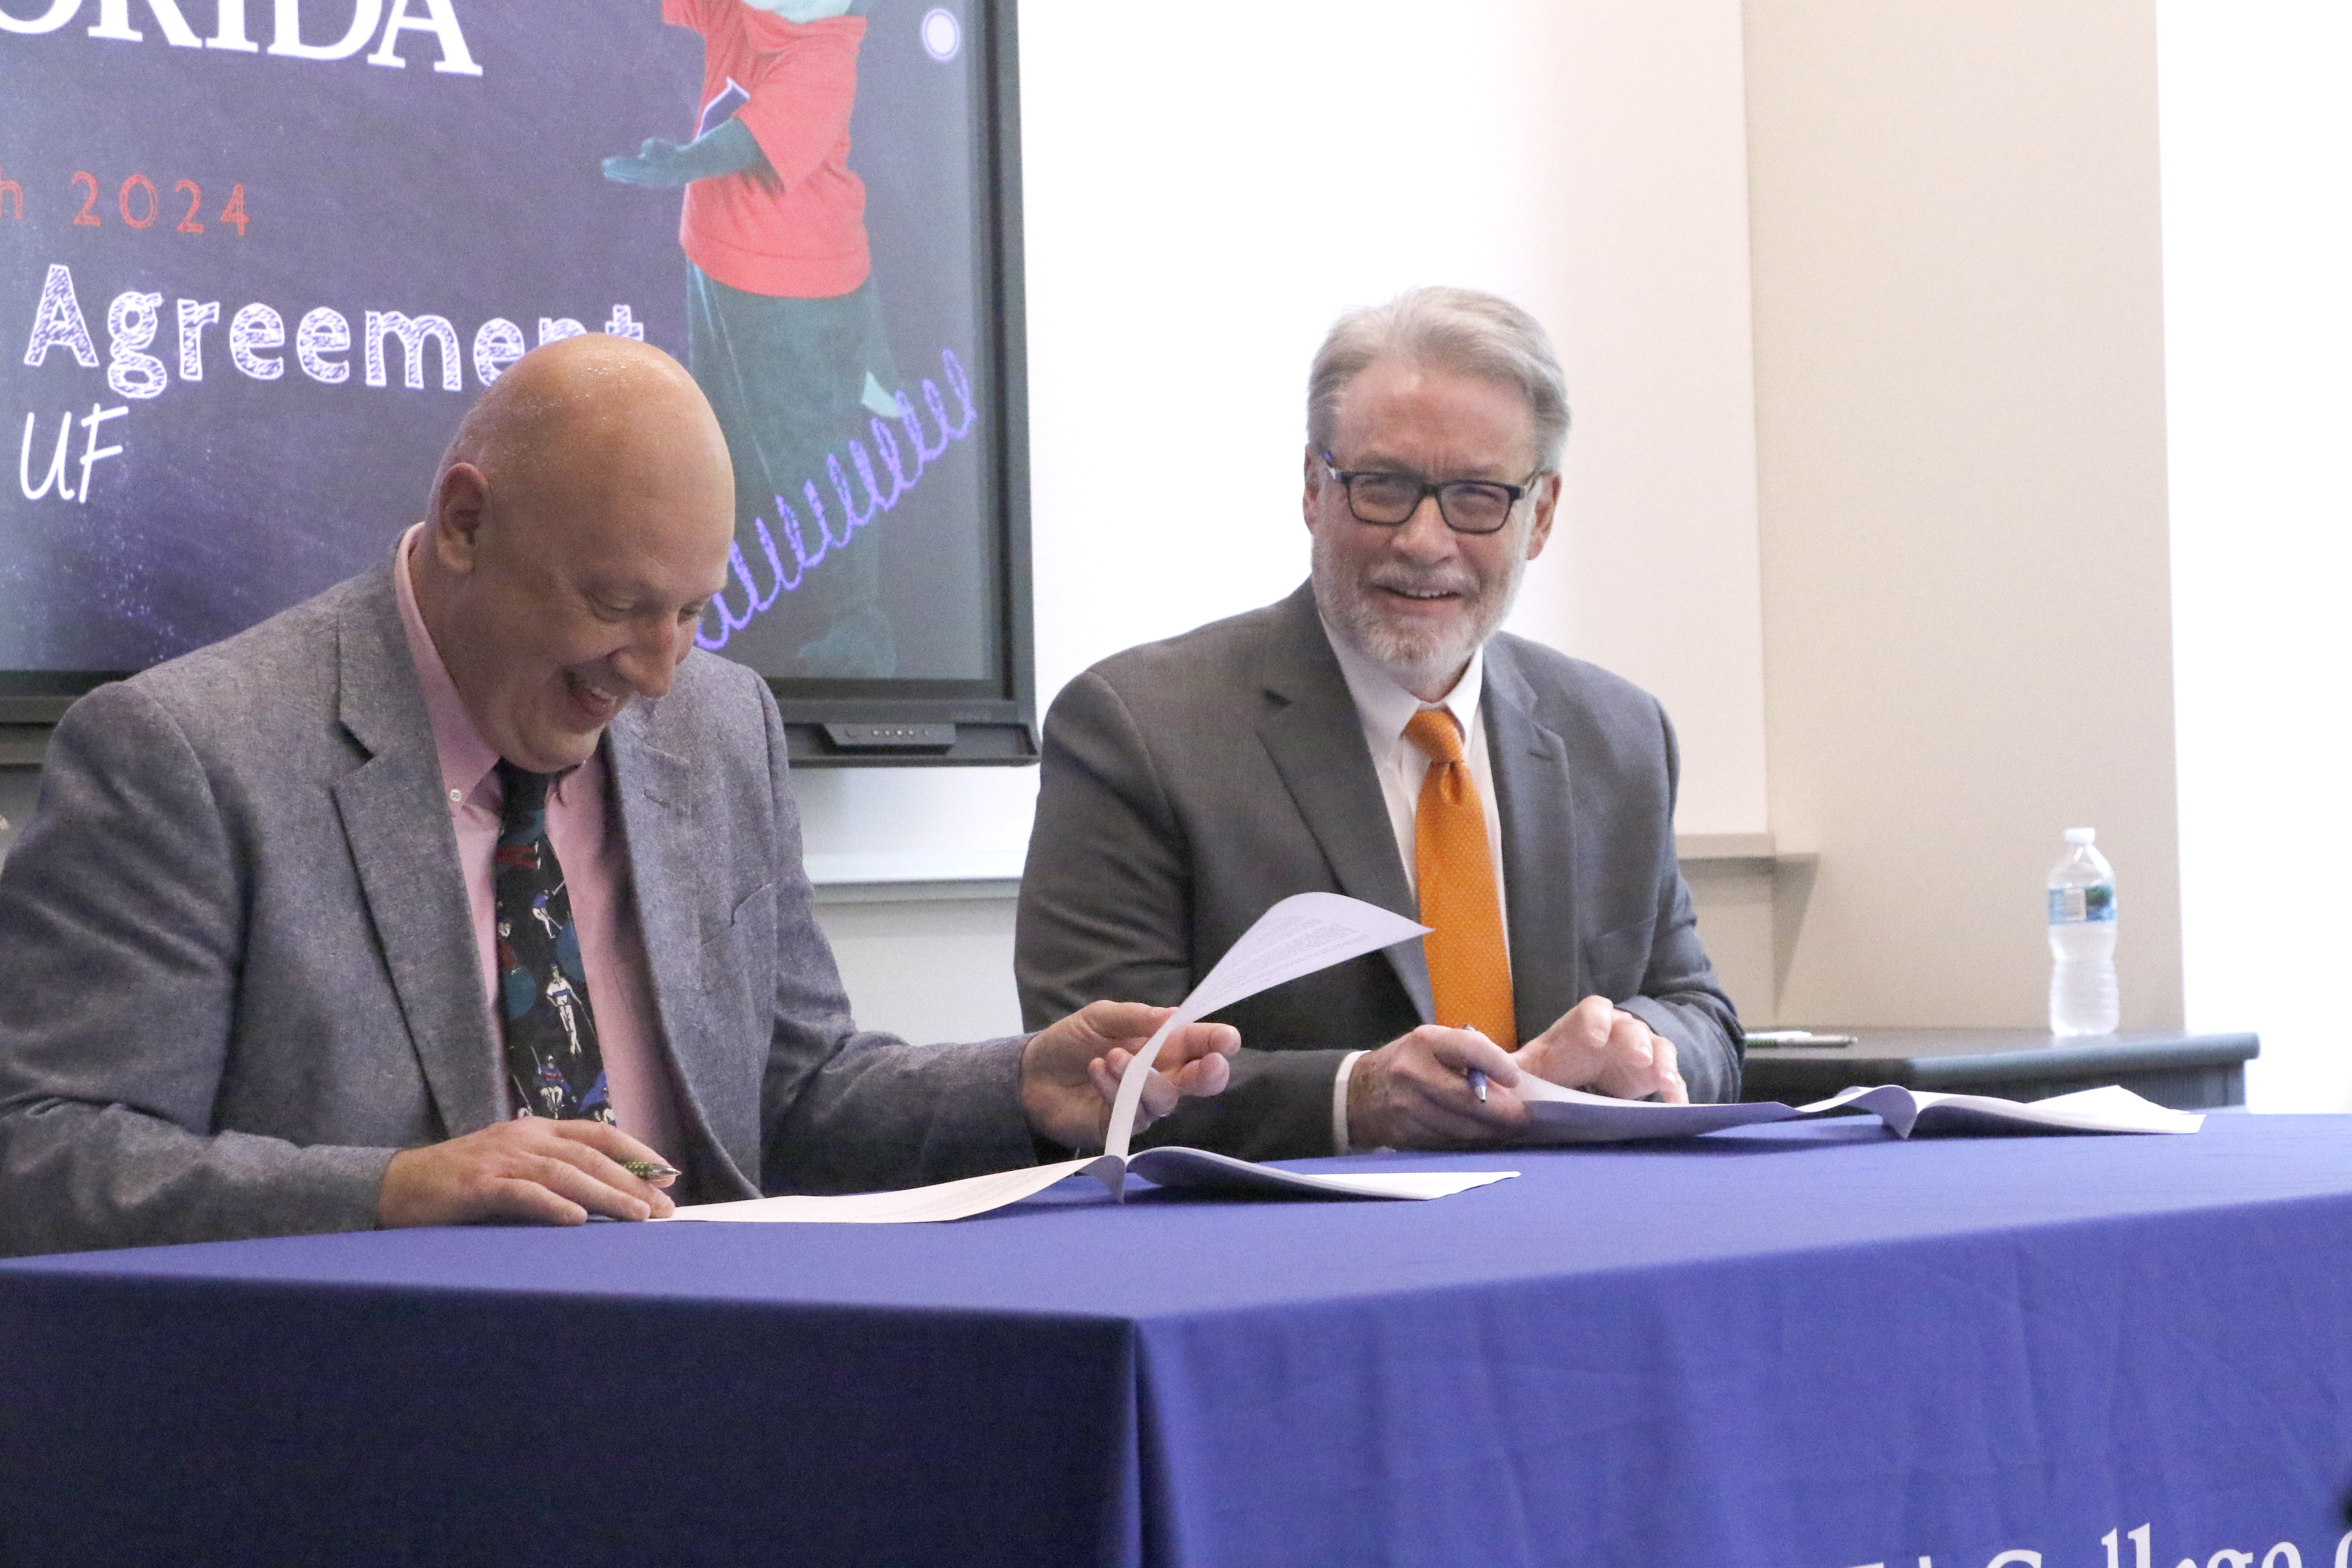 Florida Gateway College President Larry Barrett (left) and David Richardson, the dean of the College of Liberal Arts and Sciences at the University of Florida, signed an articulation agreement Thursday that guarantees FGC graduates with admission into 17 degree programs at UF’s liberal arts college. (MORGAN MCMULLEN/Lake City Reporter)